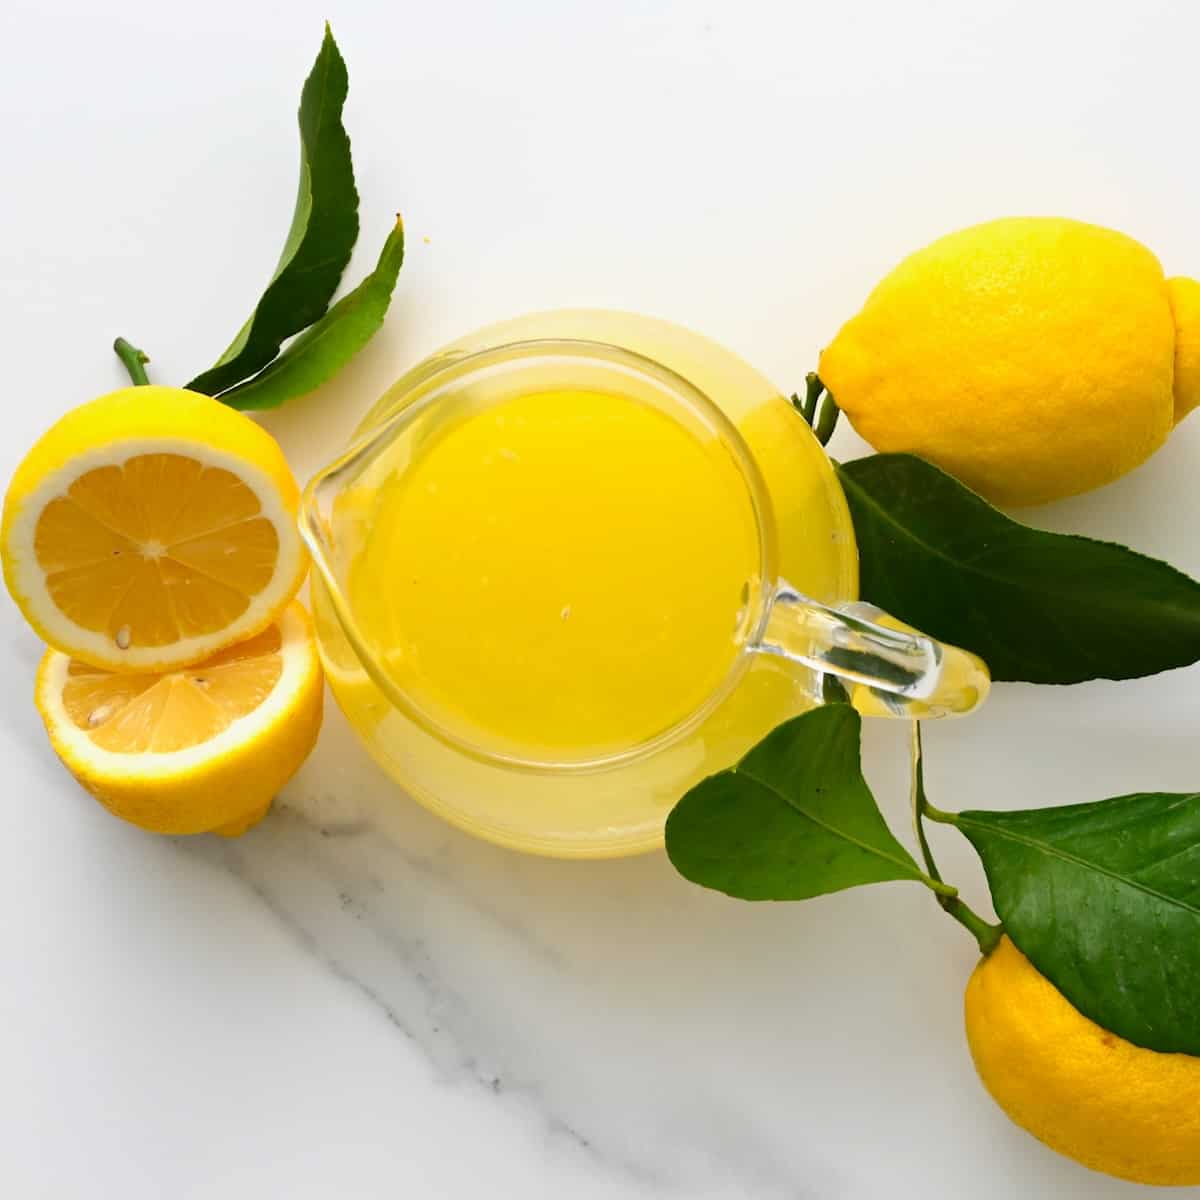 How to Juice a Lemon (6 Methods With + Without Juicer